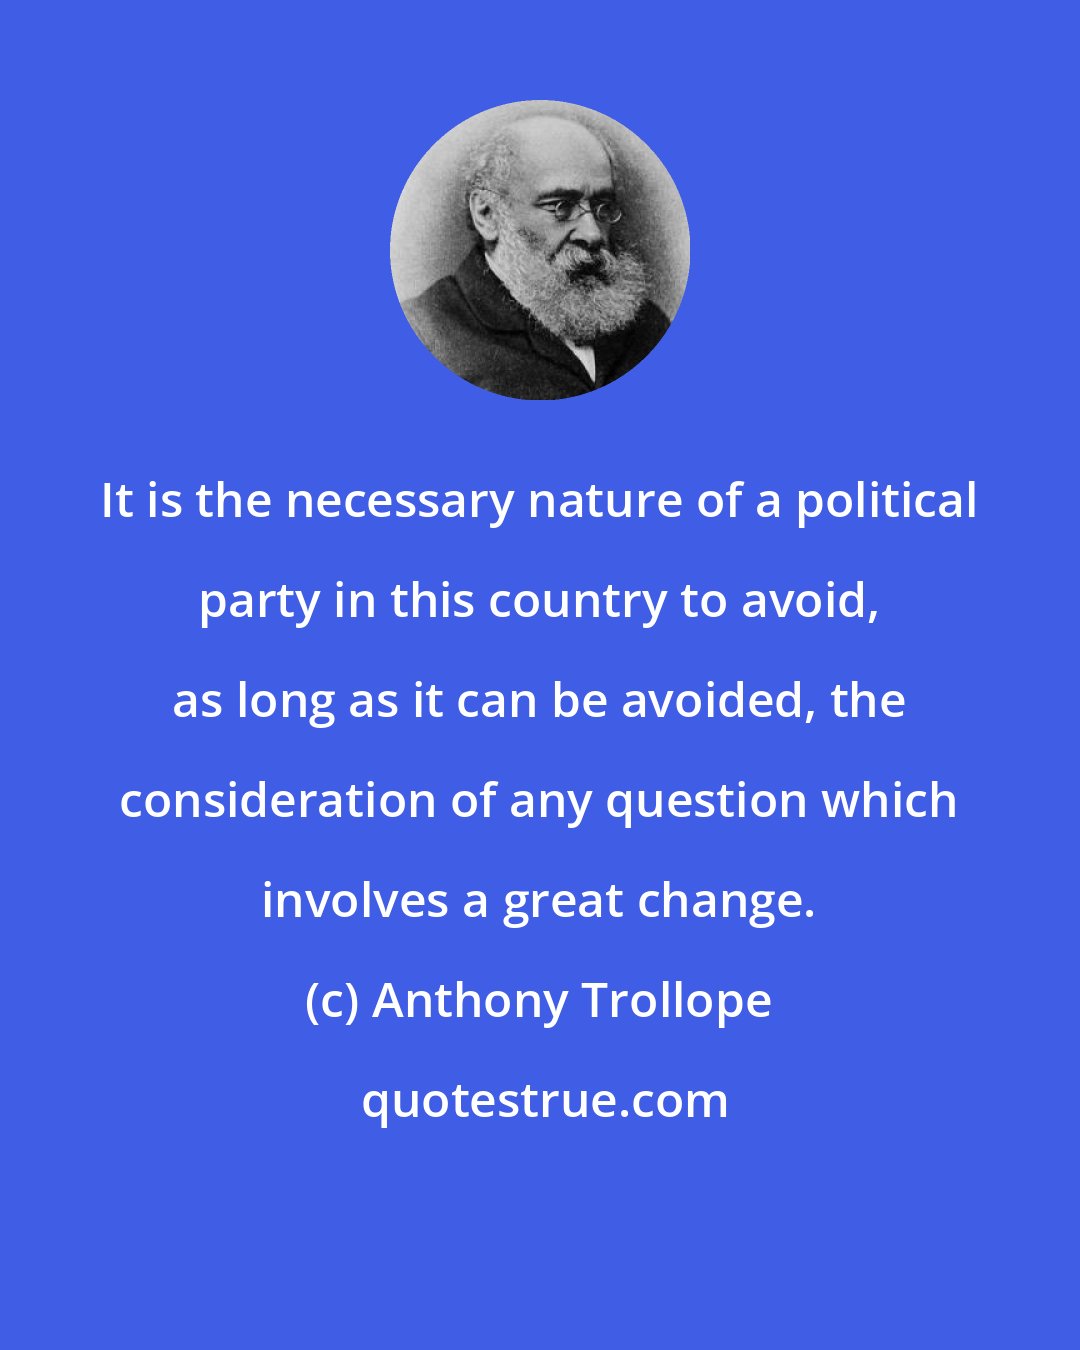 Anthony Trollope: It is the necessary nature of a political party in this country to avoid, as long as it can be avoided, the consideration of any question which involves a great change.